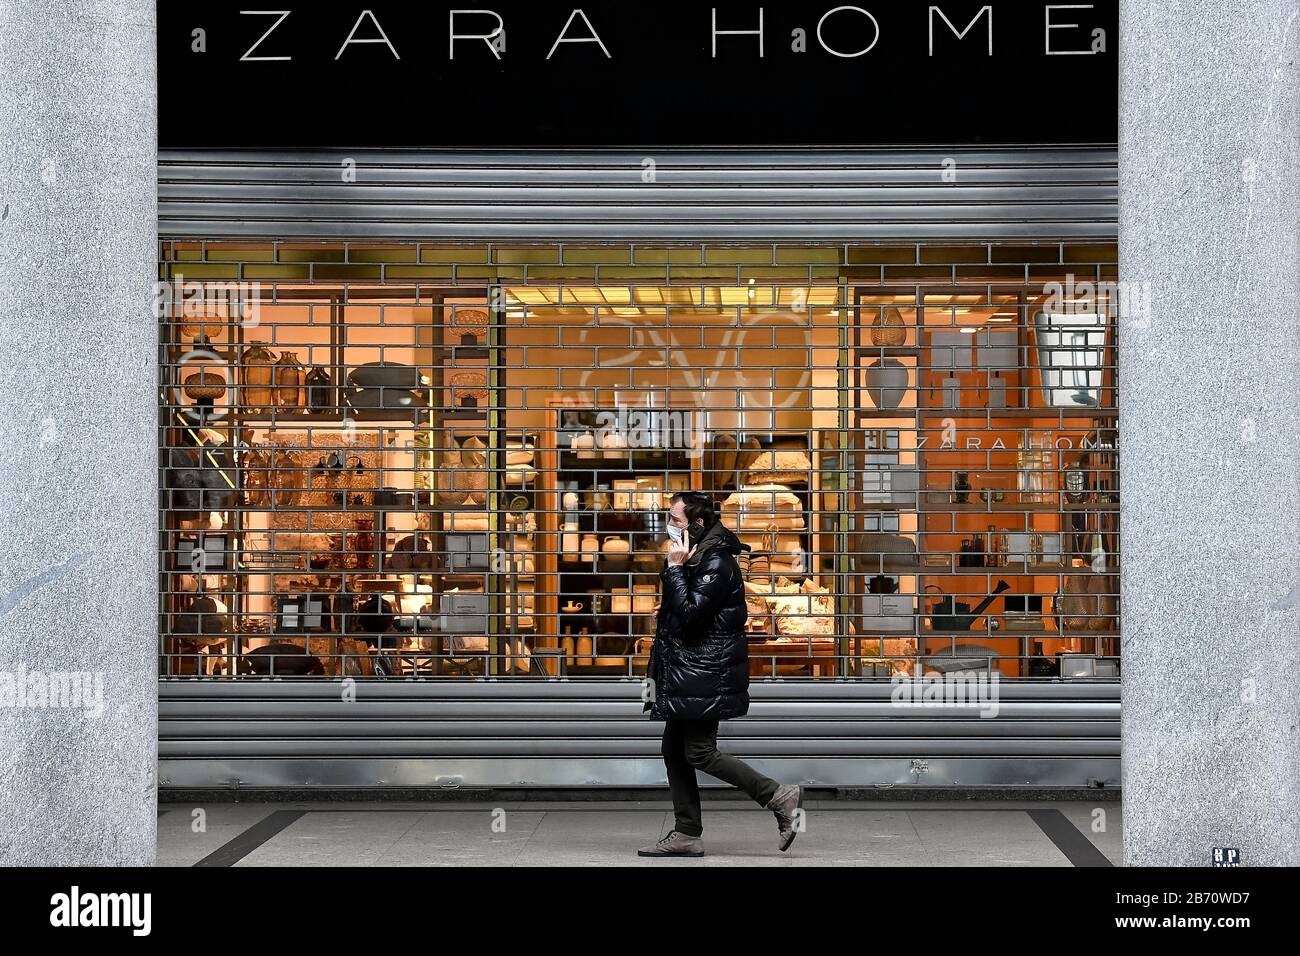 Turin, Italy. 12th Mar, 2020. TURIN, ITALY - March 12, 2020: A man wearing  a respiratory mask walks past a Zara Home shop. The Italian government  shutted down majority of stores to